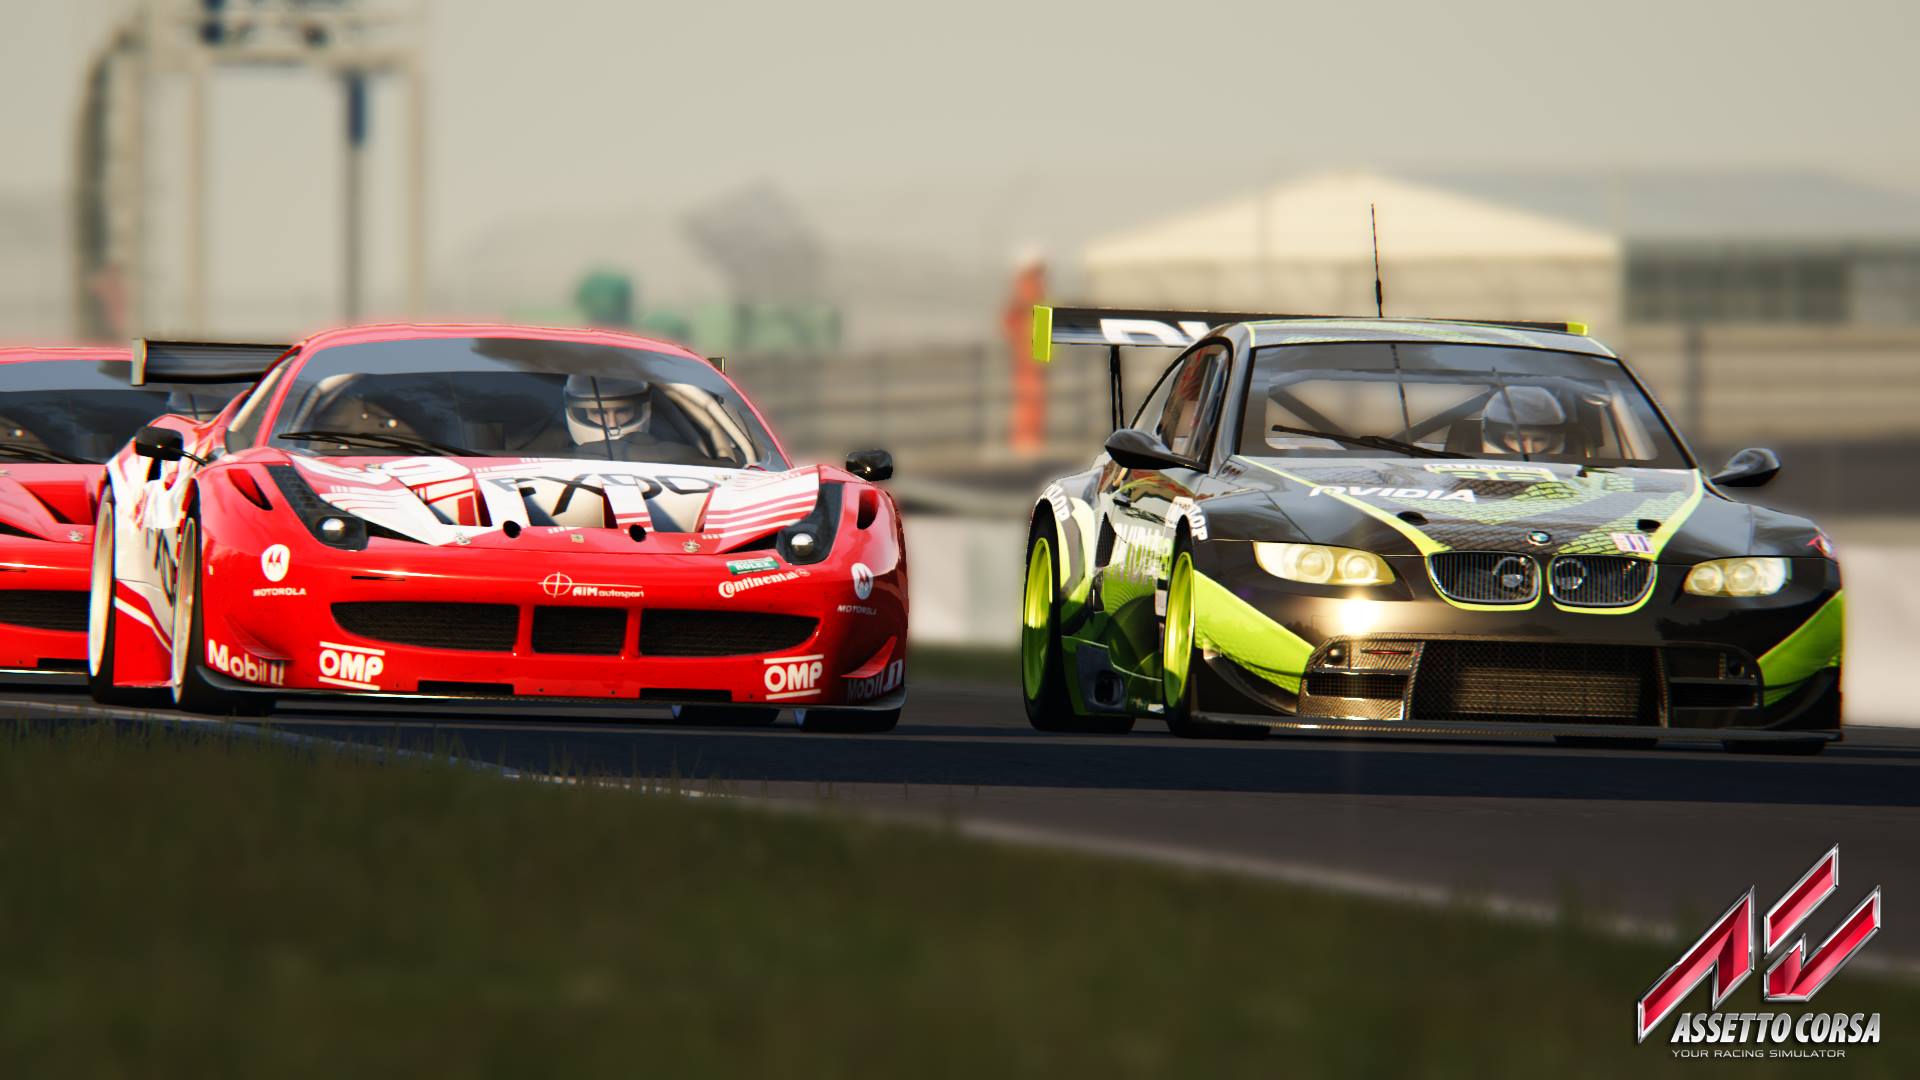 HQ Assetto Corsa Wallpapers | File 148.96Kb